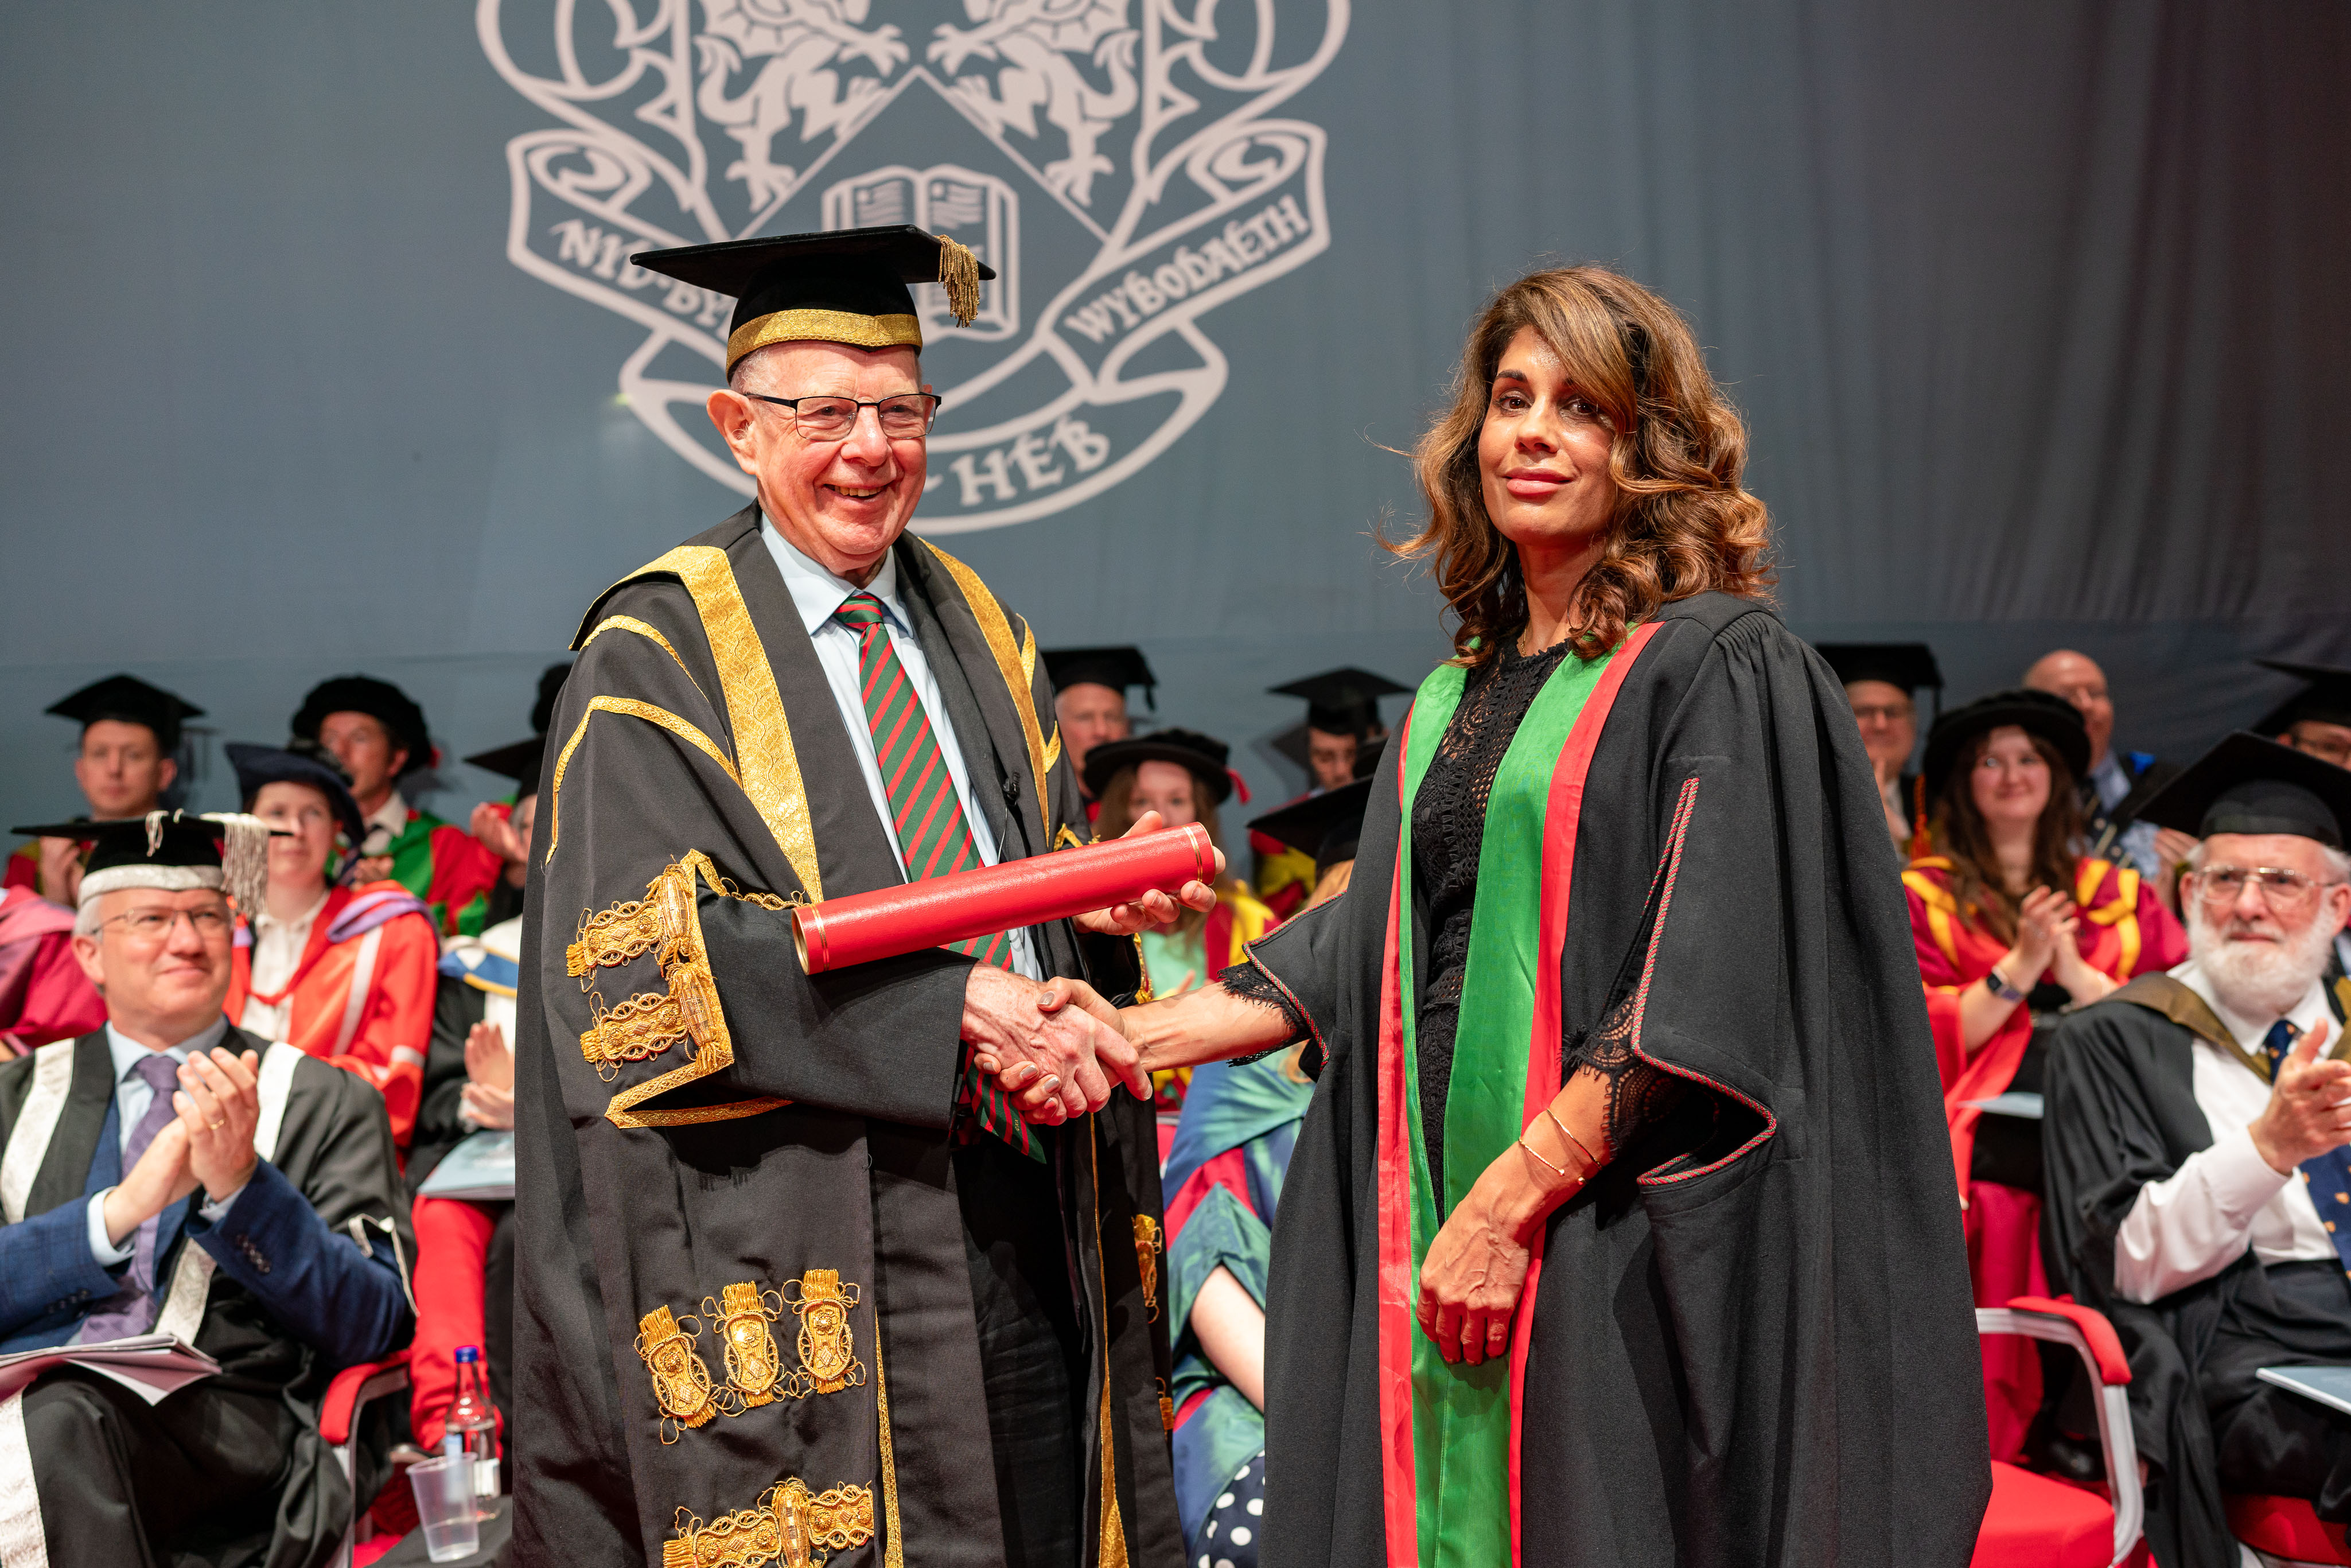 Rt Hon Lord Thomas of Cwmgïedd, Chancellor of Aberystwyth University, presenting Dr Anna Persaud as Honorary Fellow